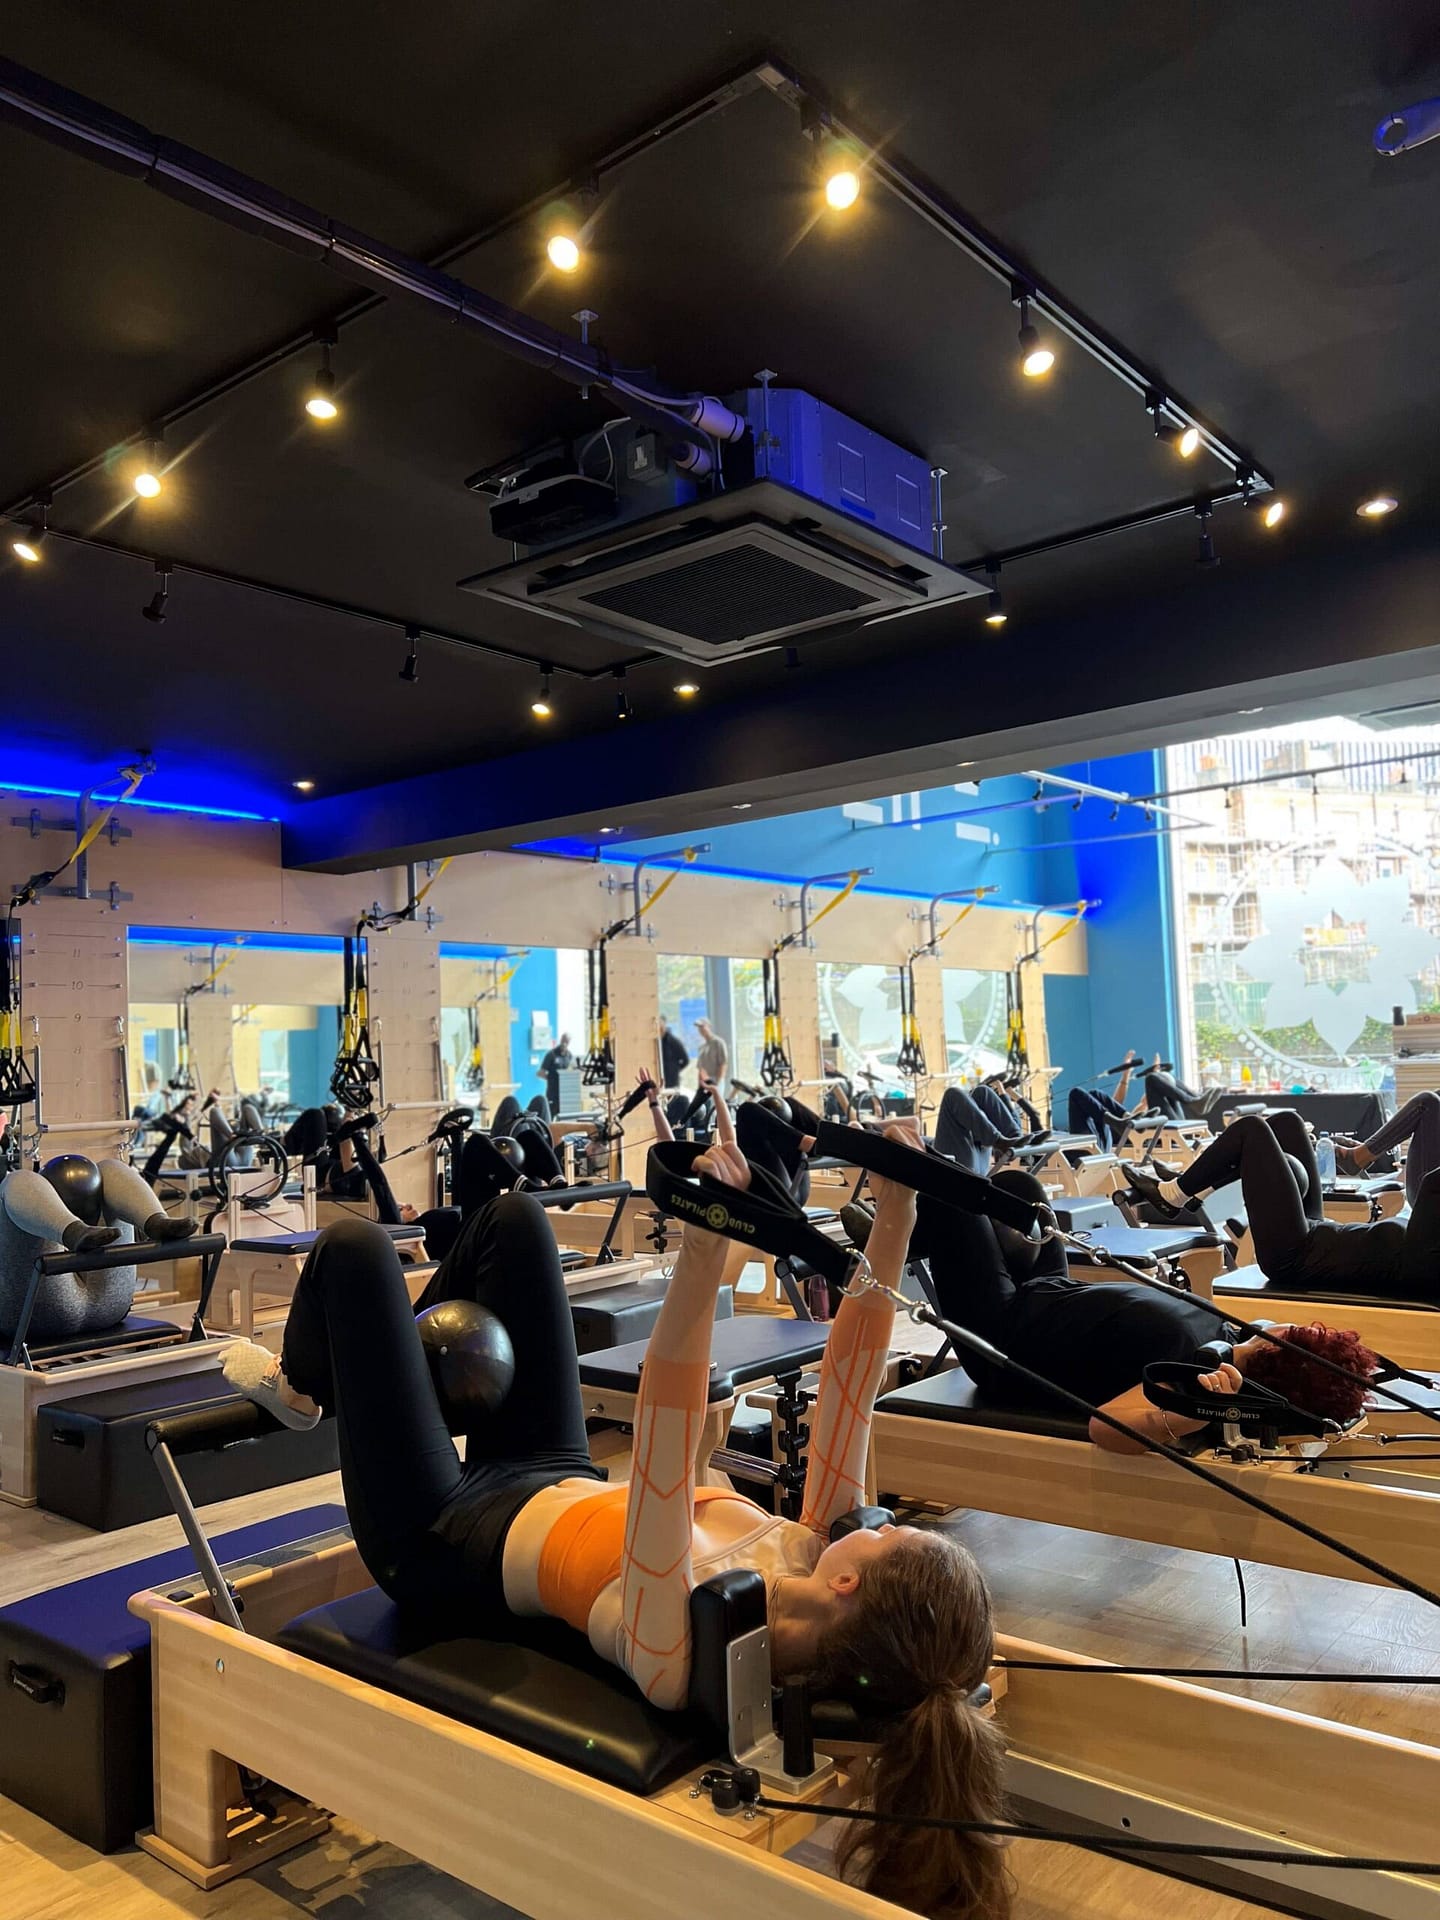 TRX® PARTNERS WITH XPONENTIAL BRANDS CLUB PILATES